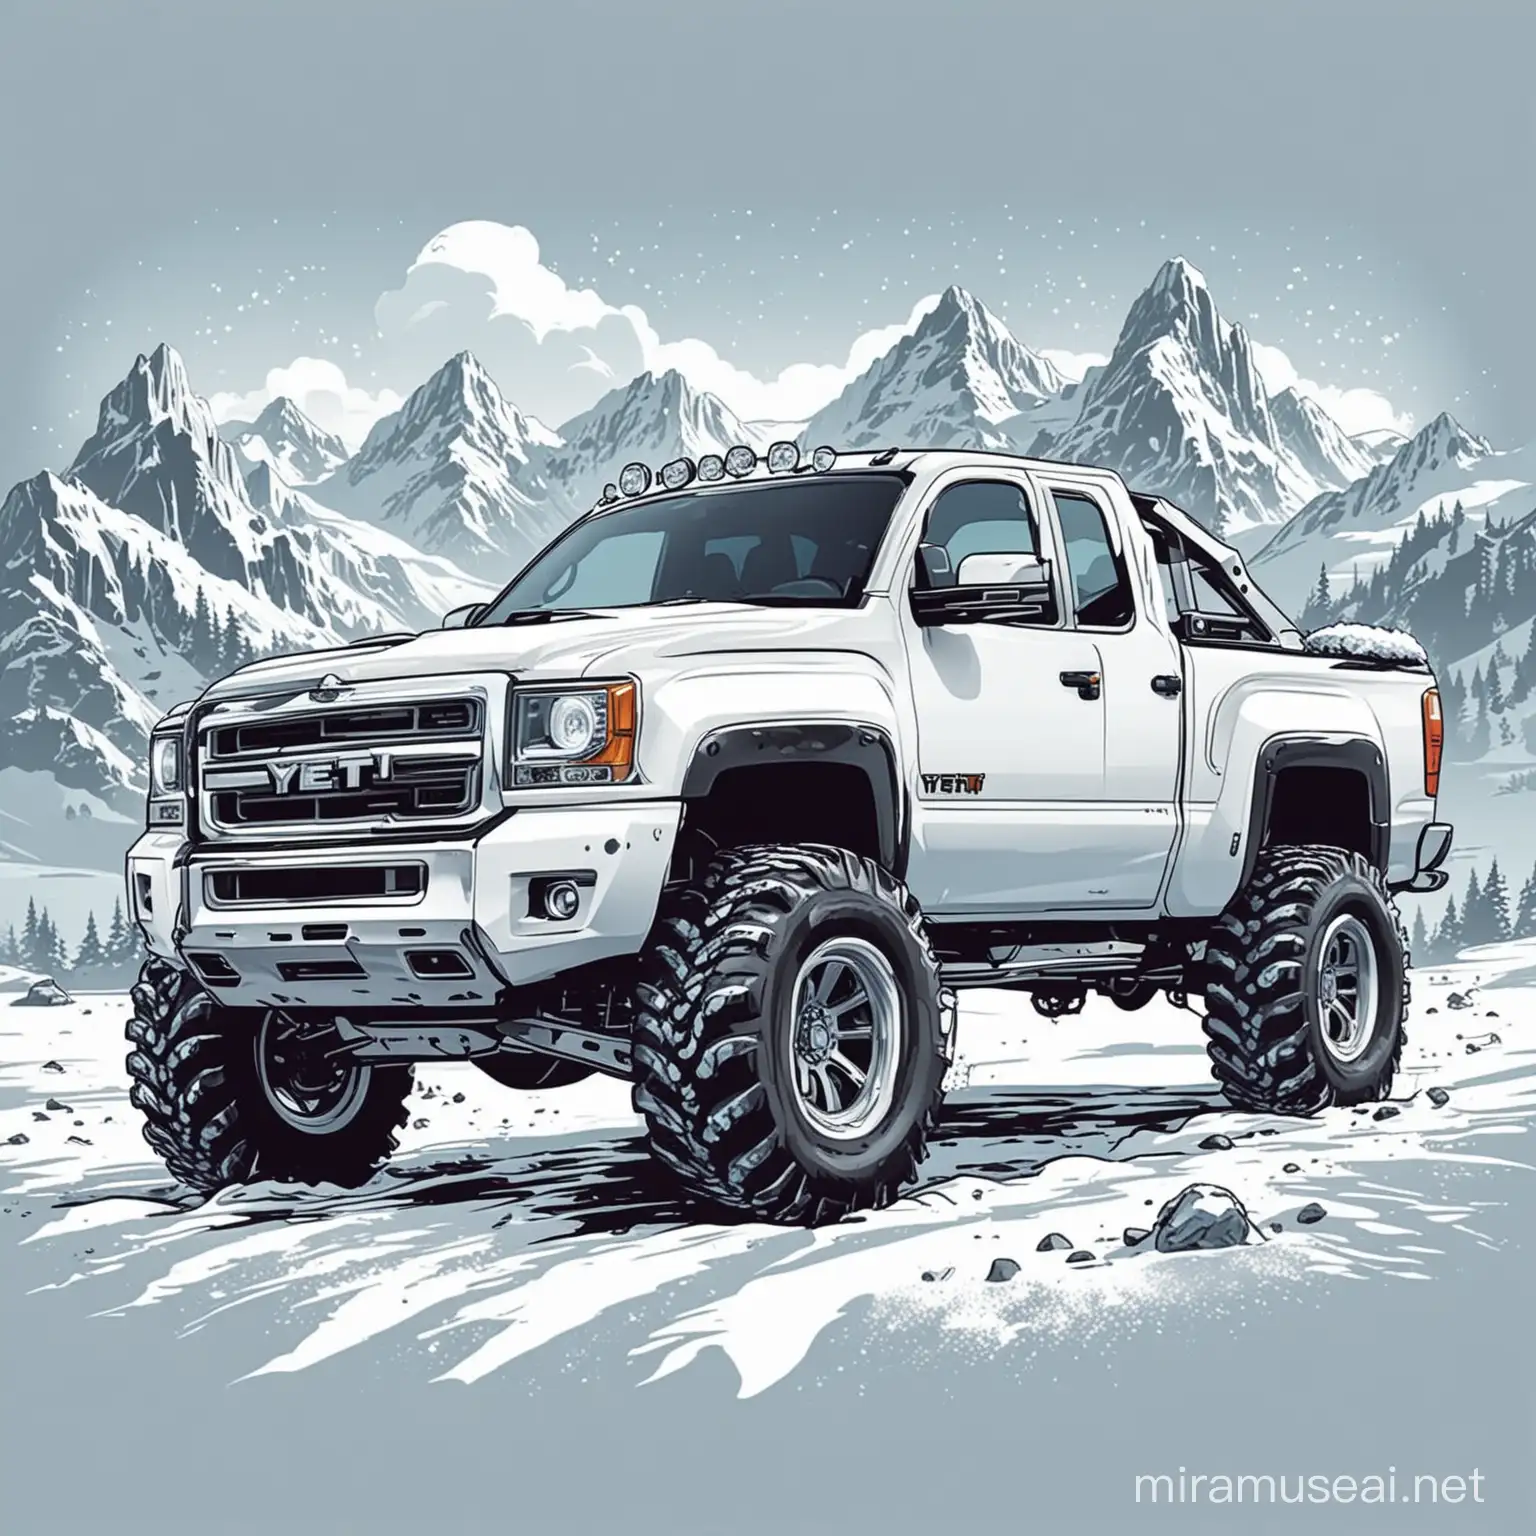 white pickup truck, in the snow, big yeti in the background, comic style, vector, image to print on tshirt